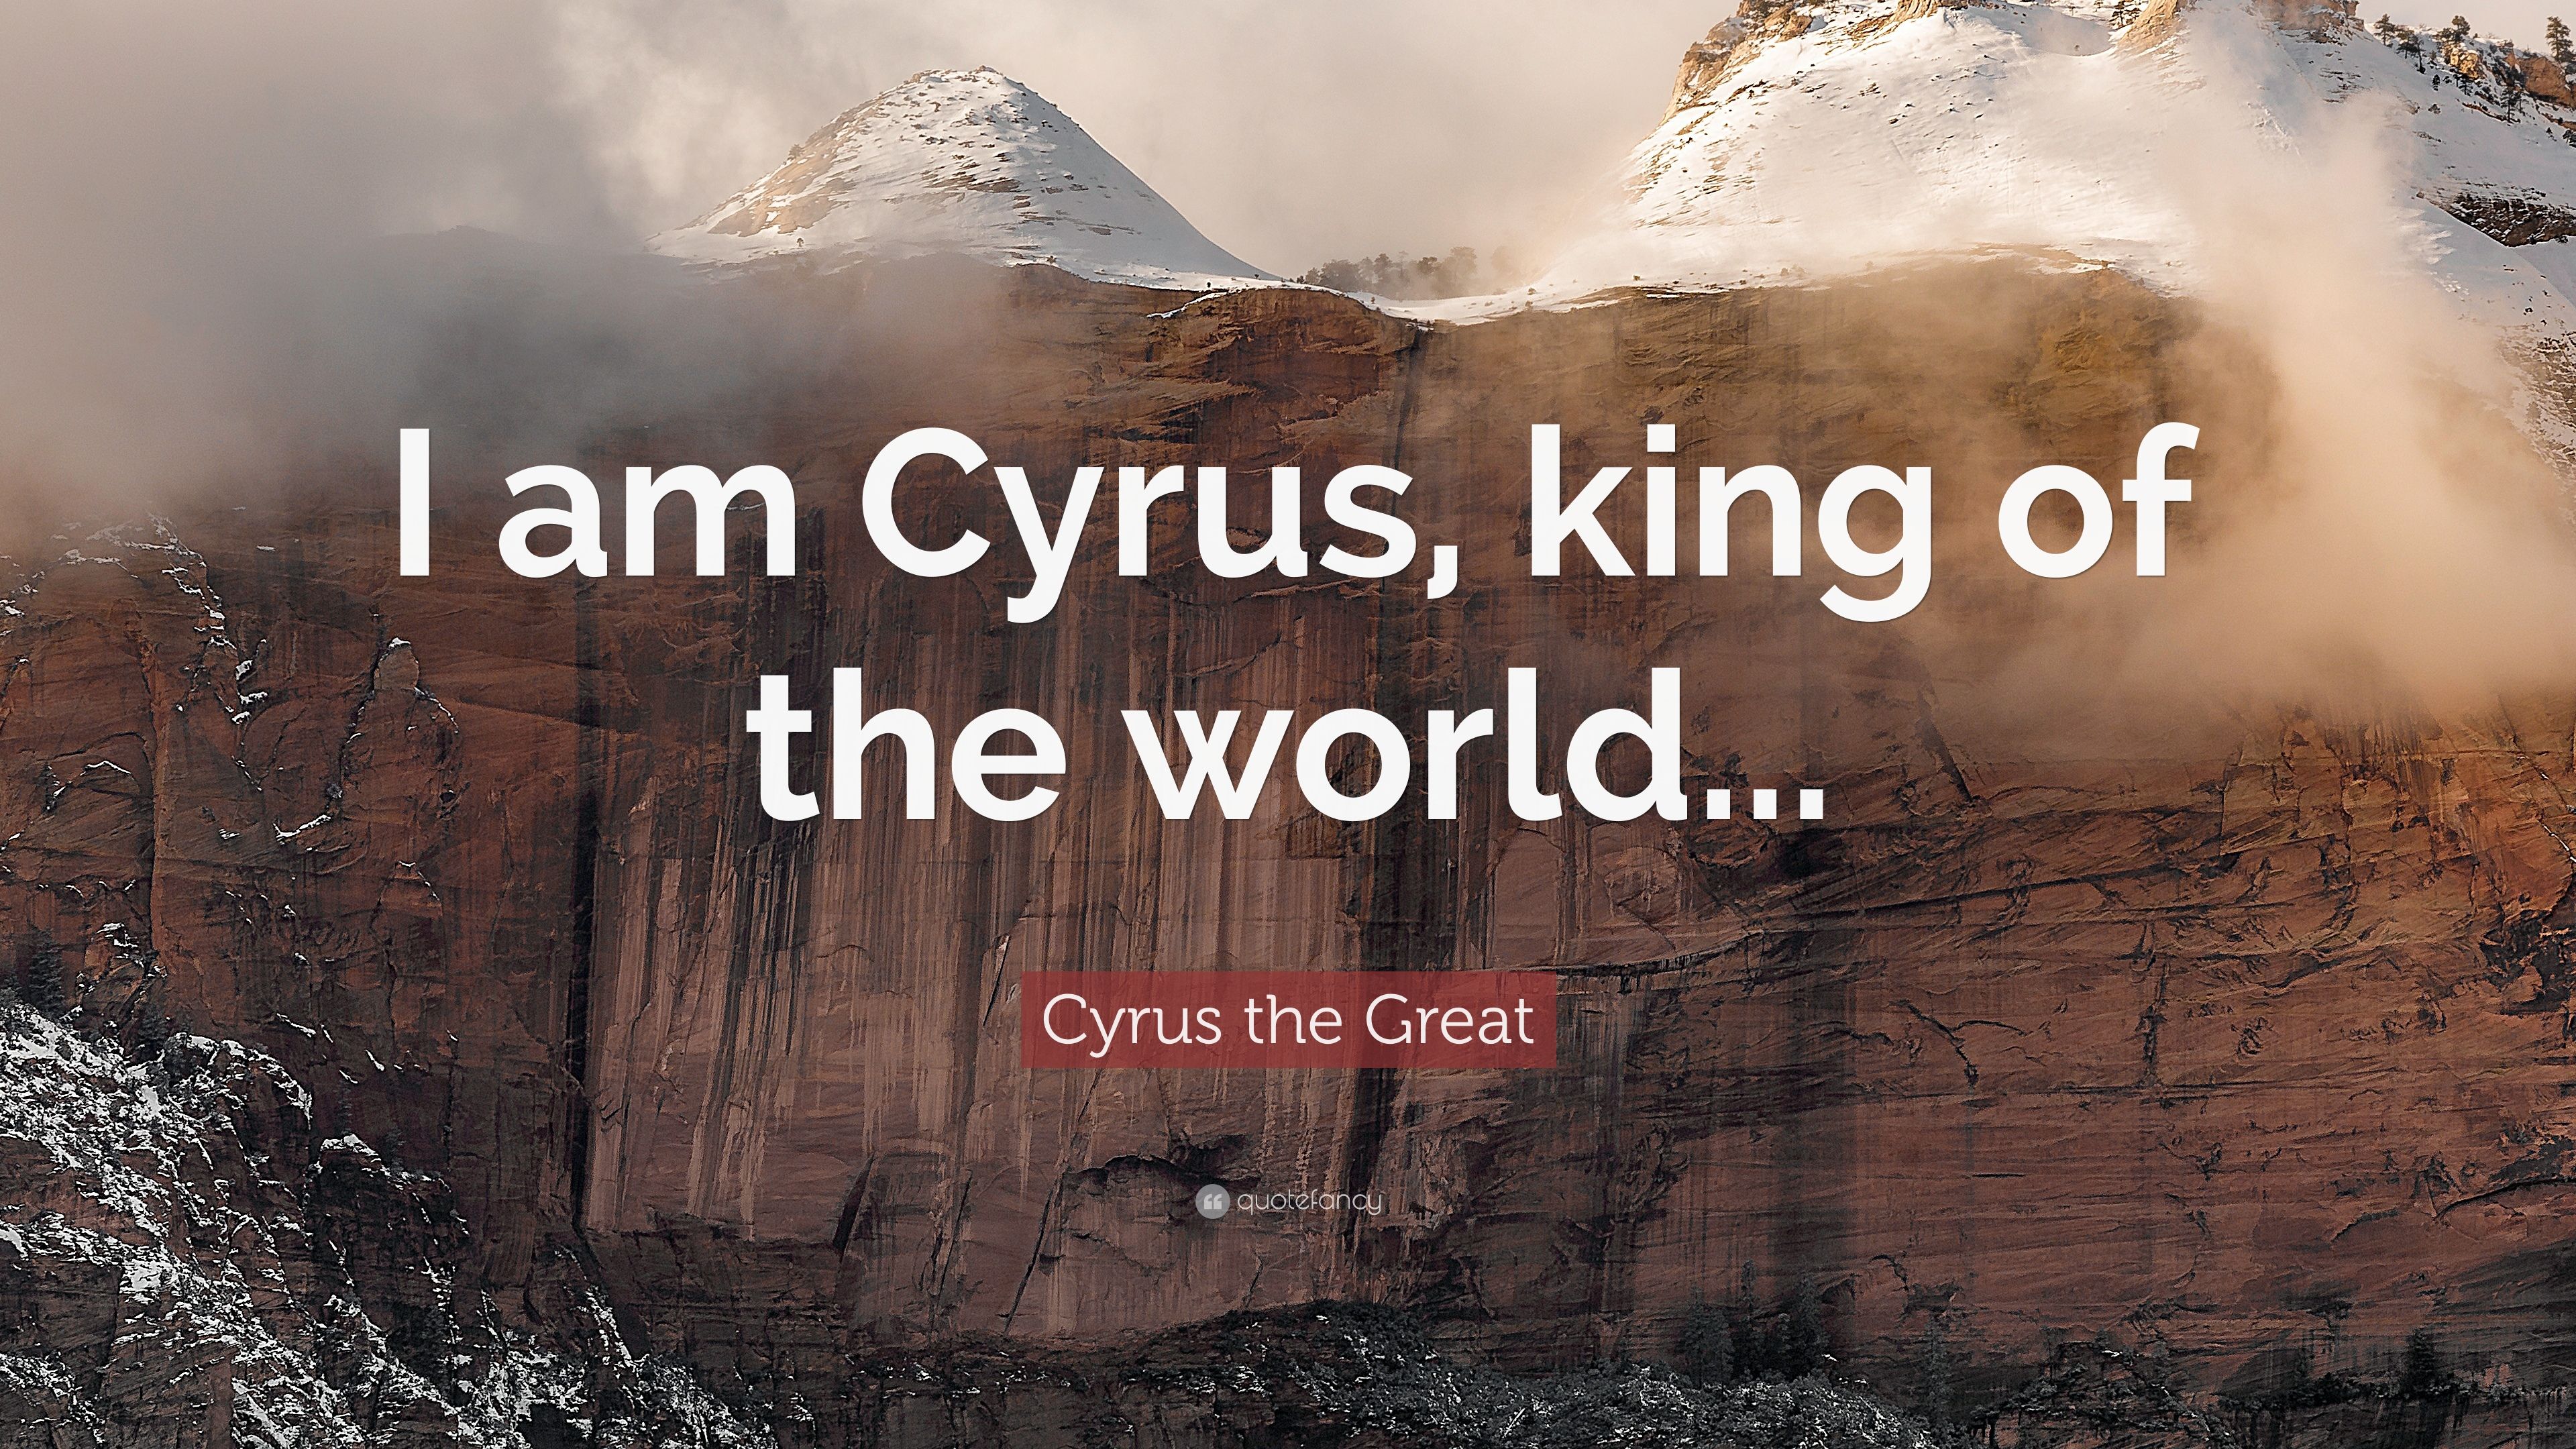 Cyrus the Great Quotes (12 wallpaper)